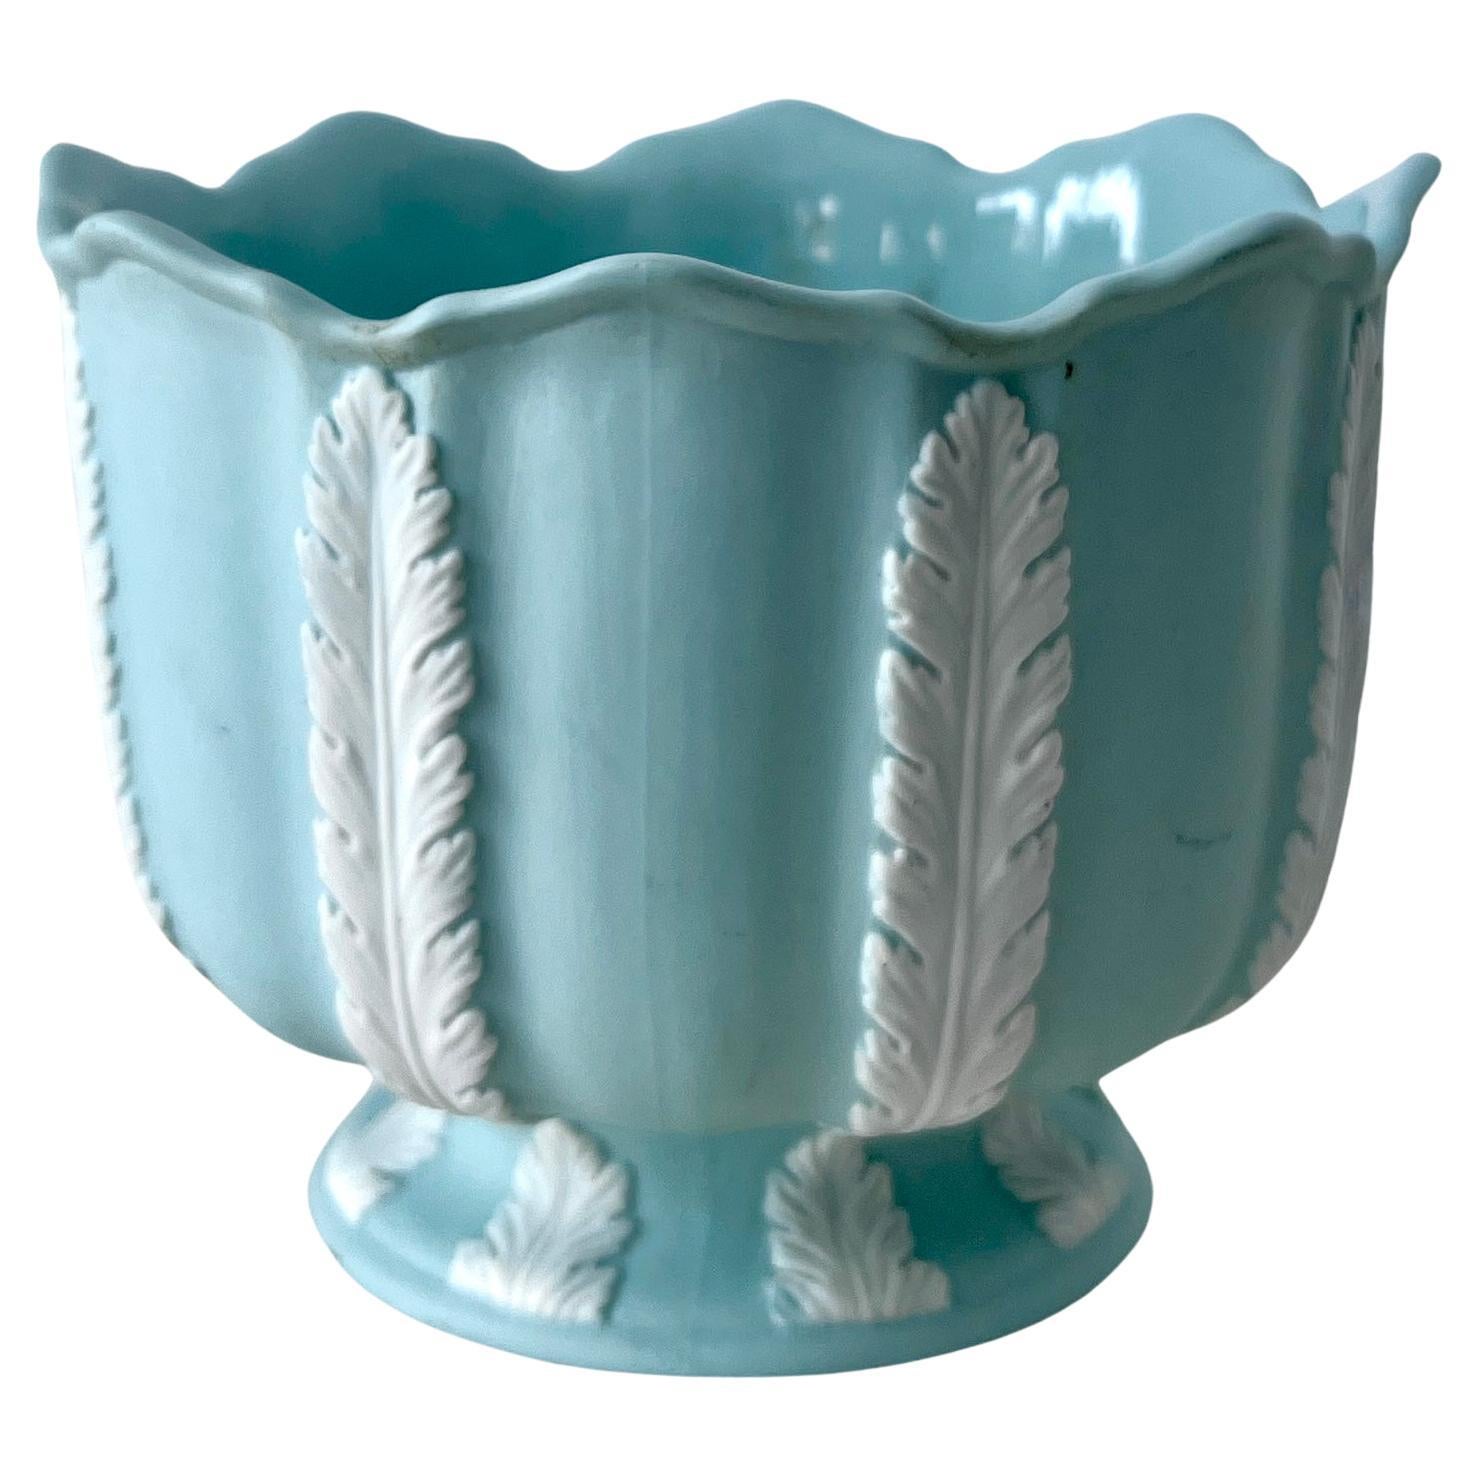 What Colour is Wedgewood blue?